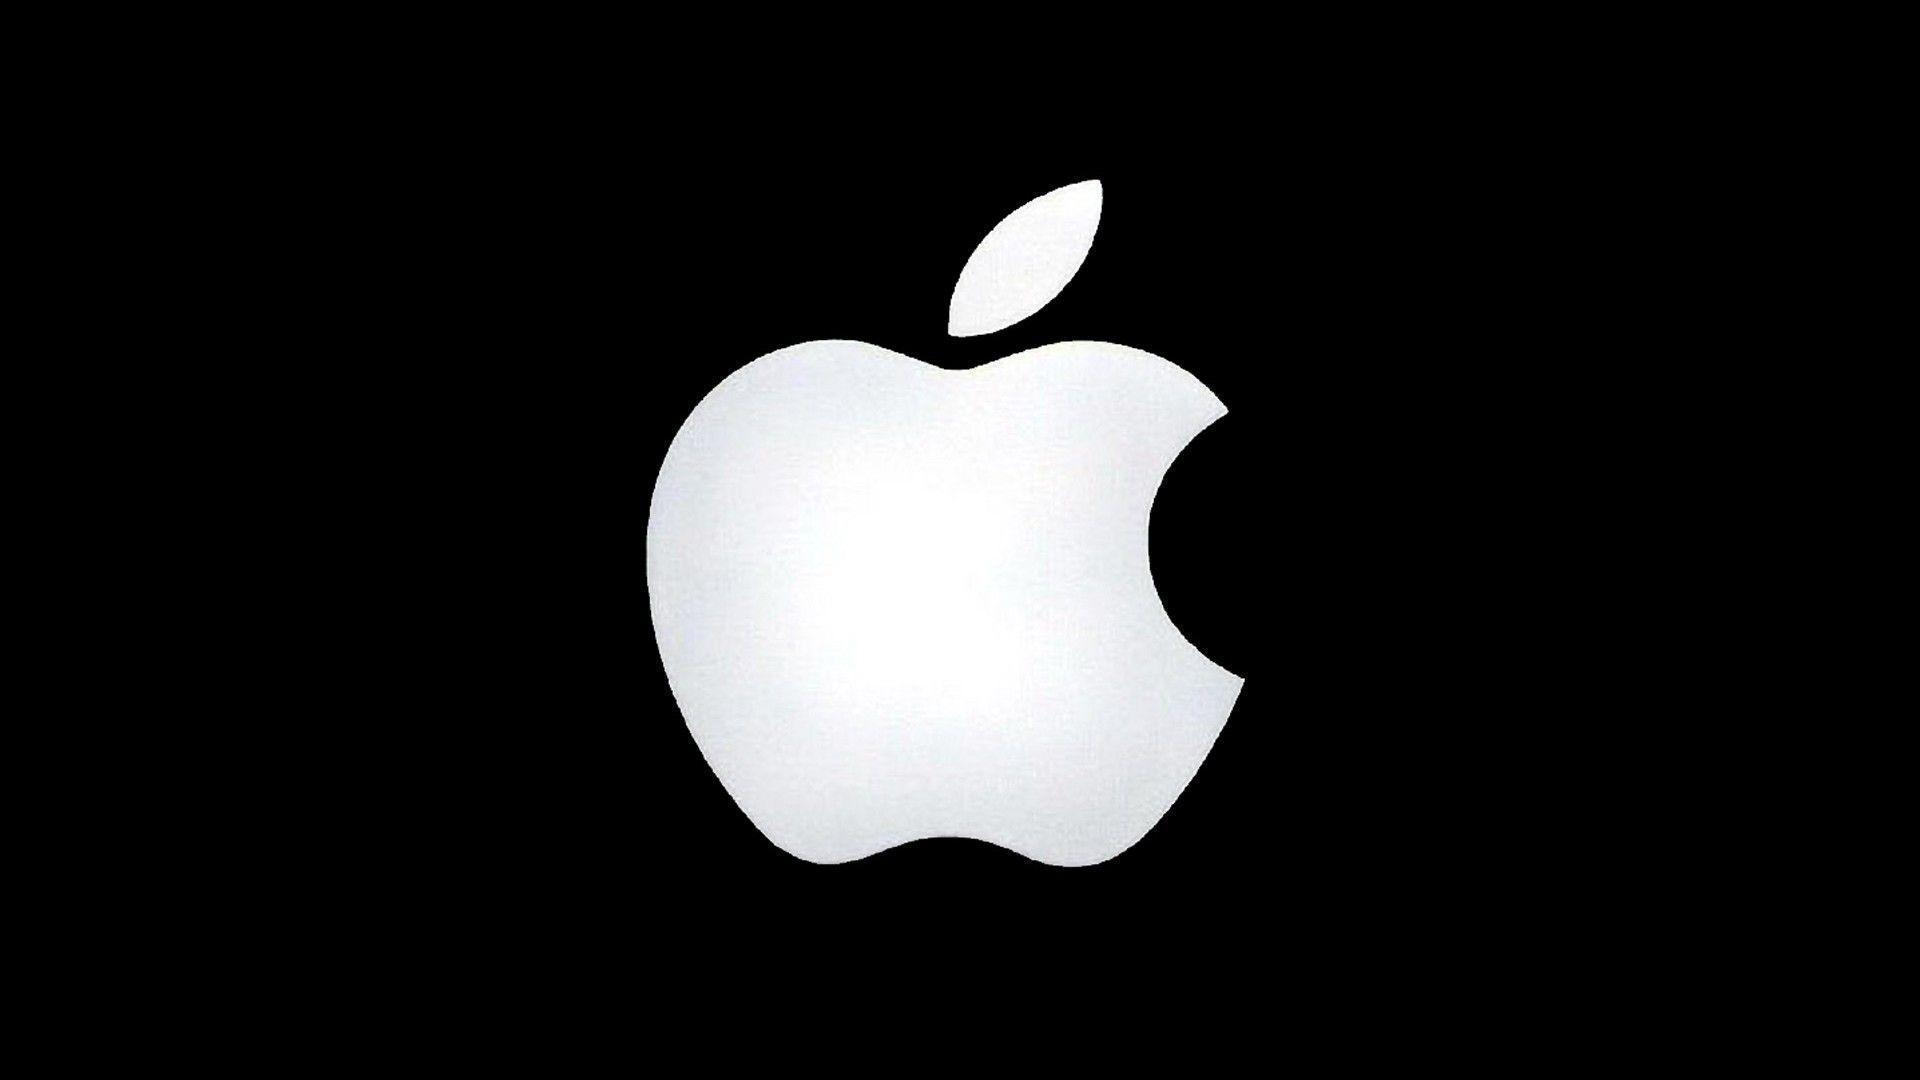 Download 1600x900 Apple Logo Pictures Black And White Backgrounds